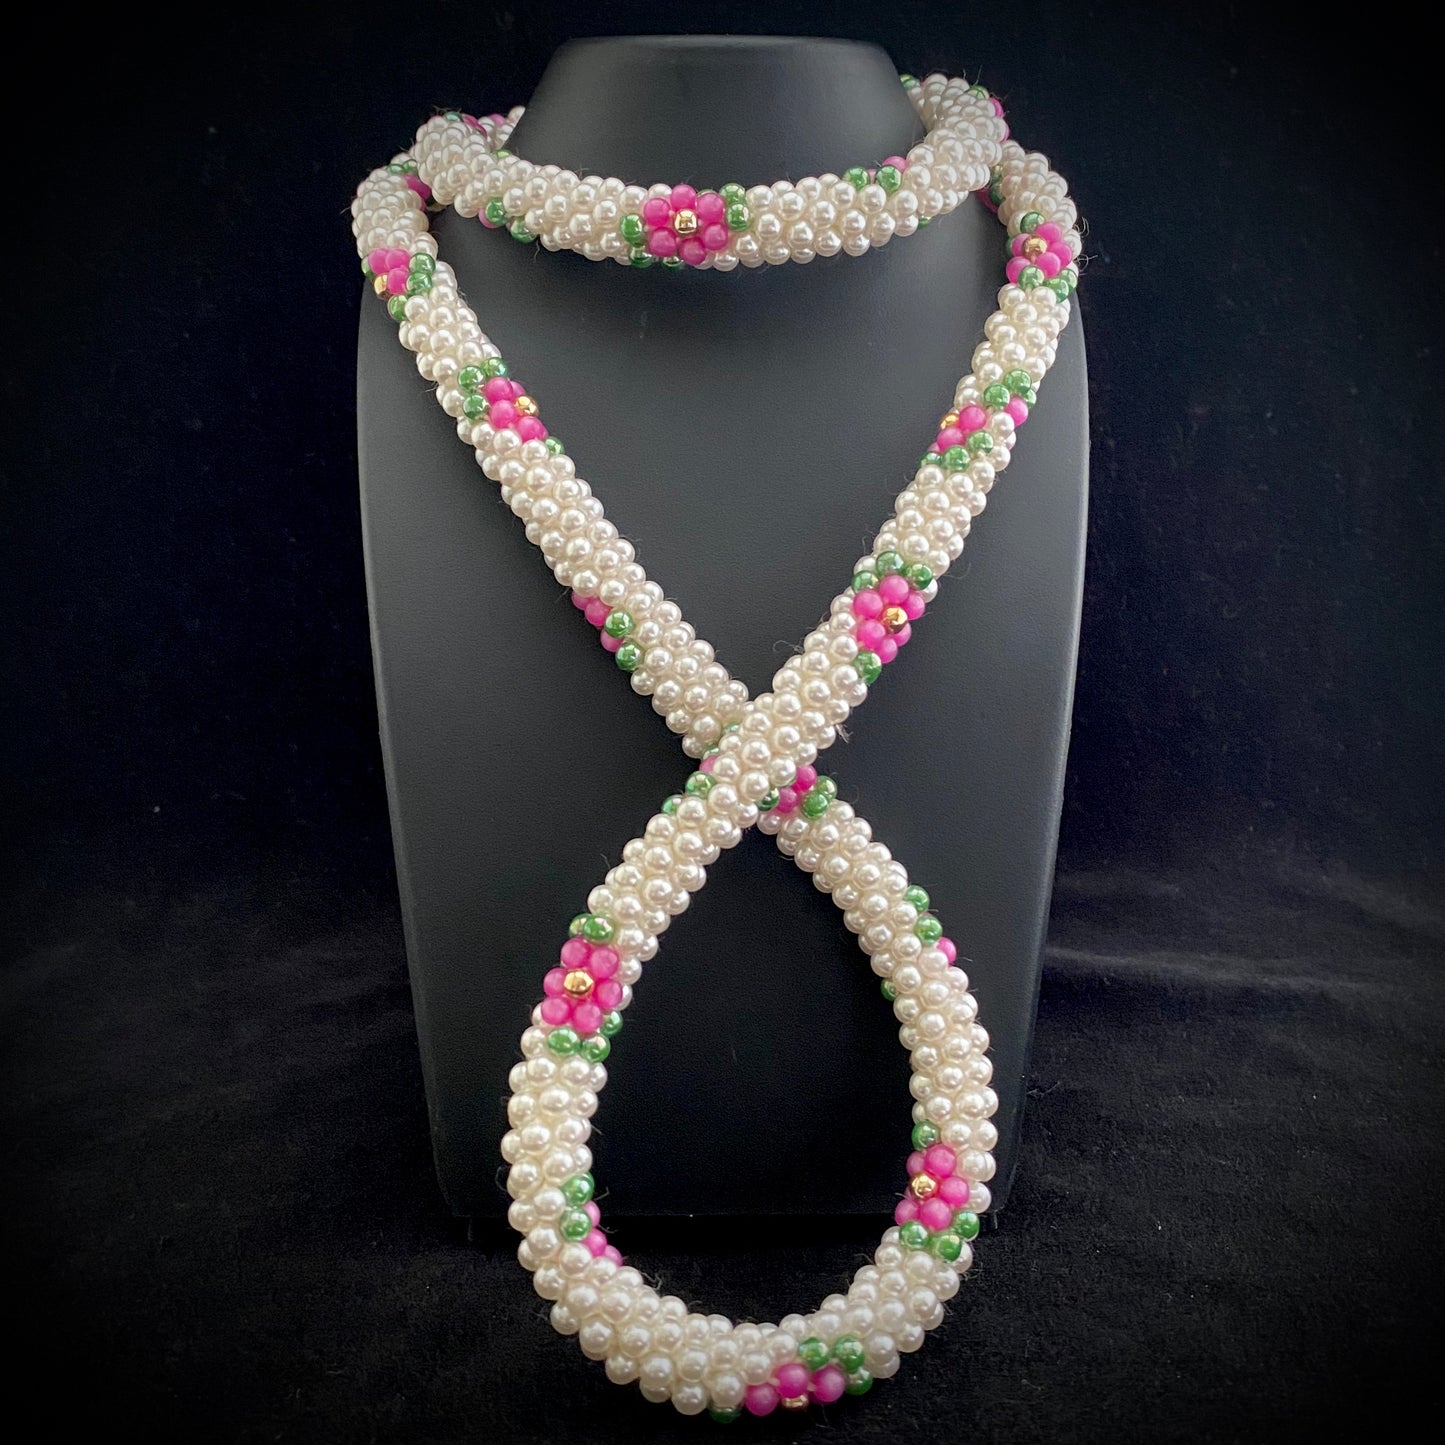 1970s Beaded Rope Necklace - Retro Kandy Vintage